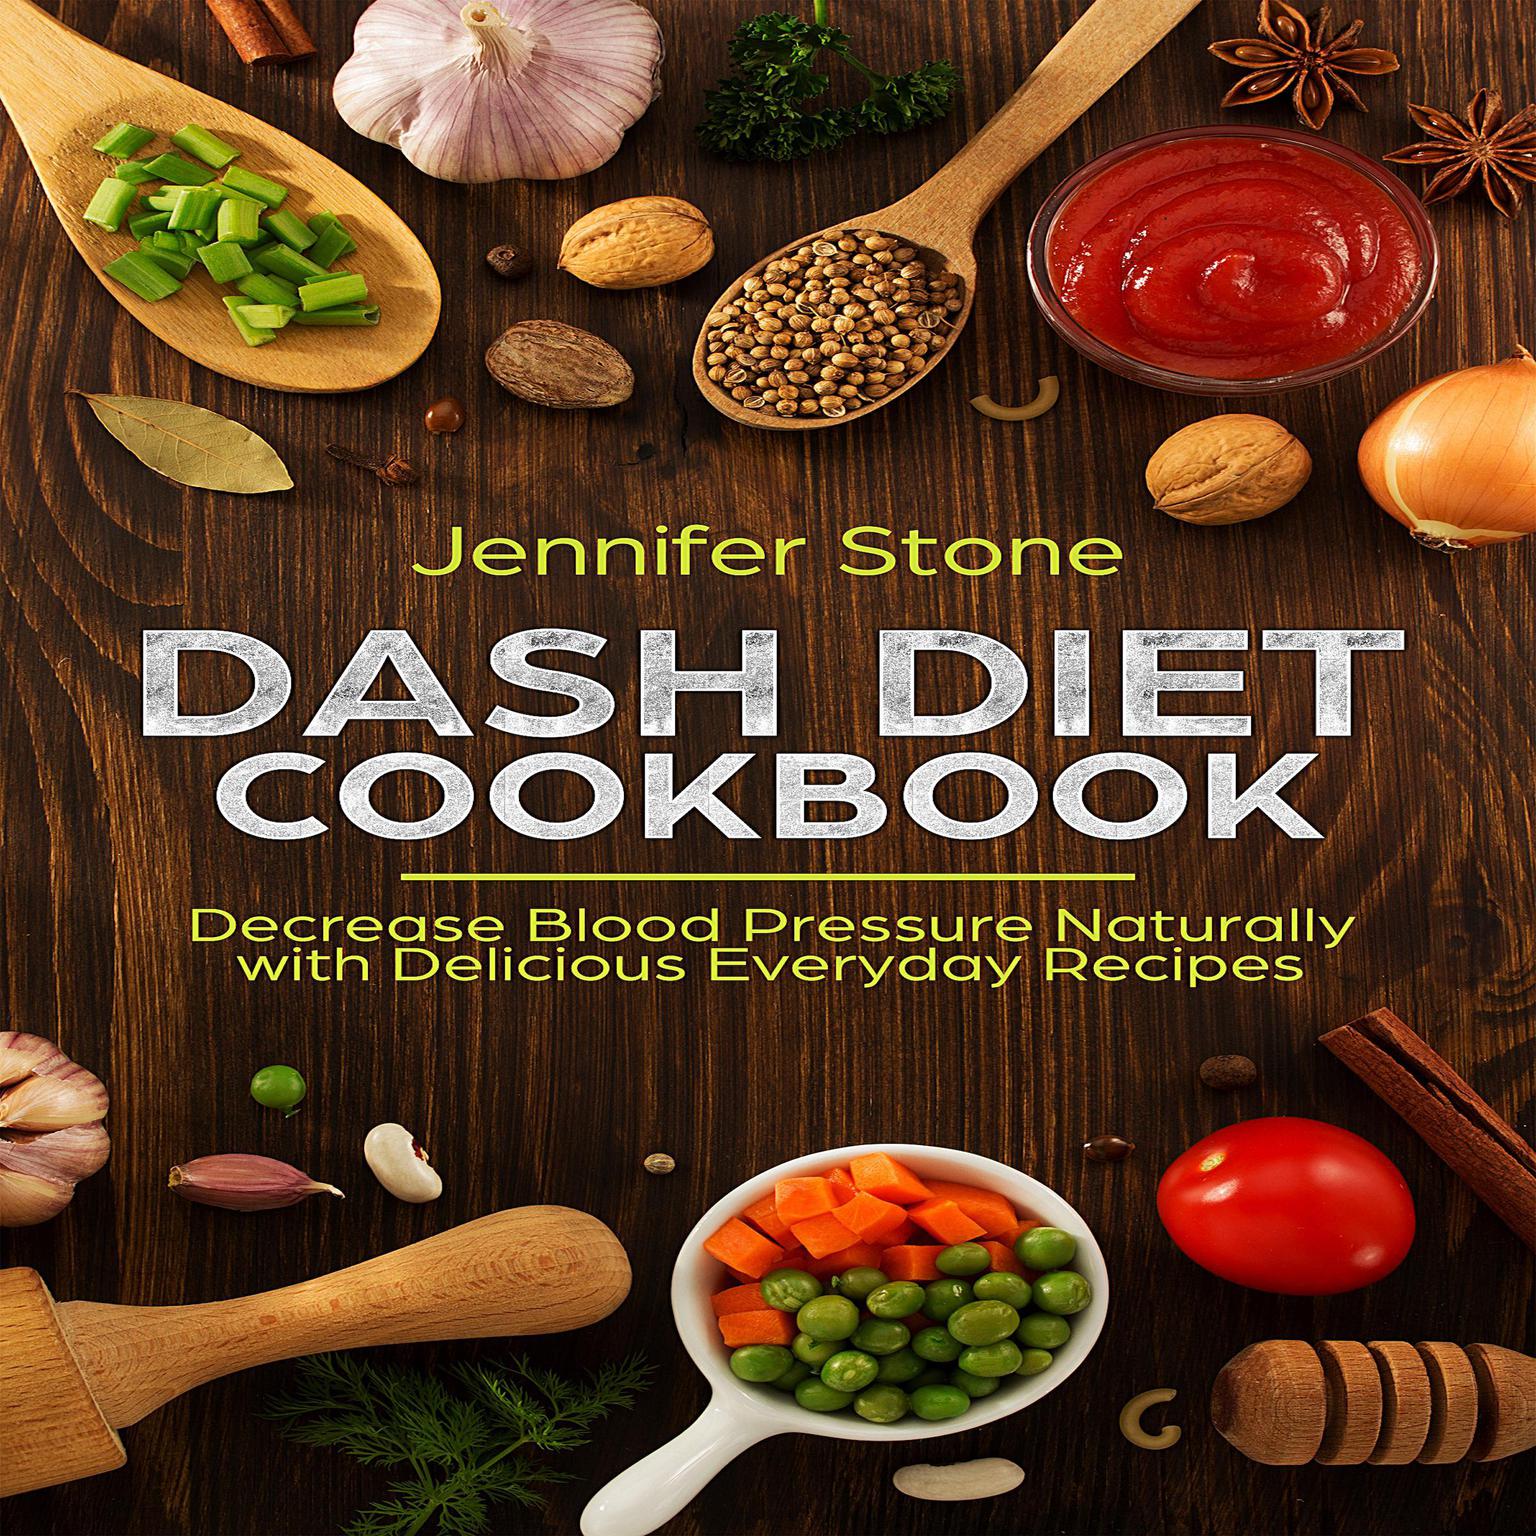 DASH Diet Cookbook: Decrease Blood Pressure Naturally with Delicious Everyday Recipes Audiobook, by Jennifer Stone